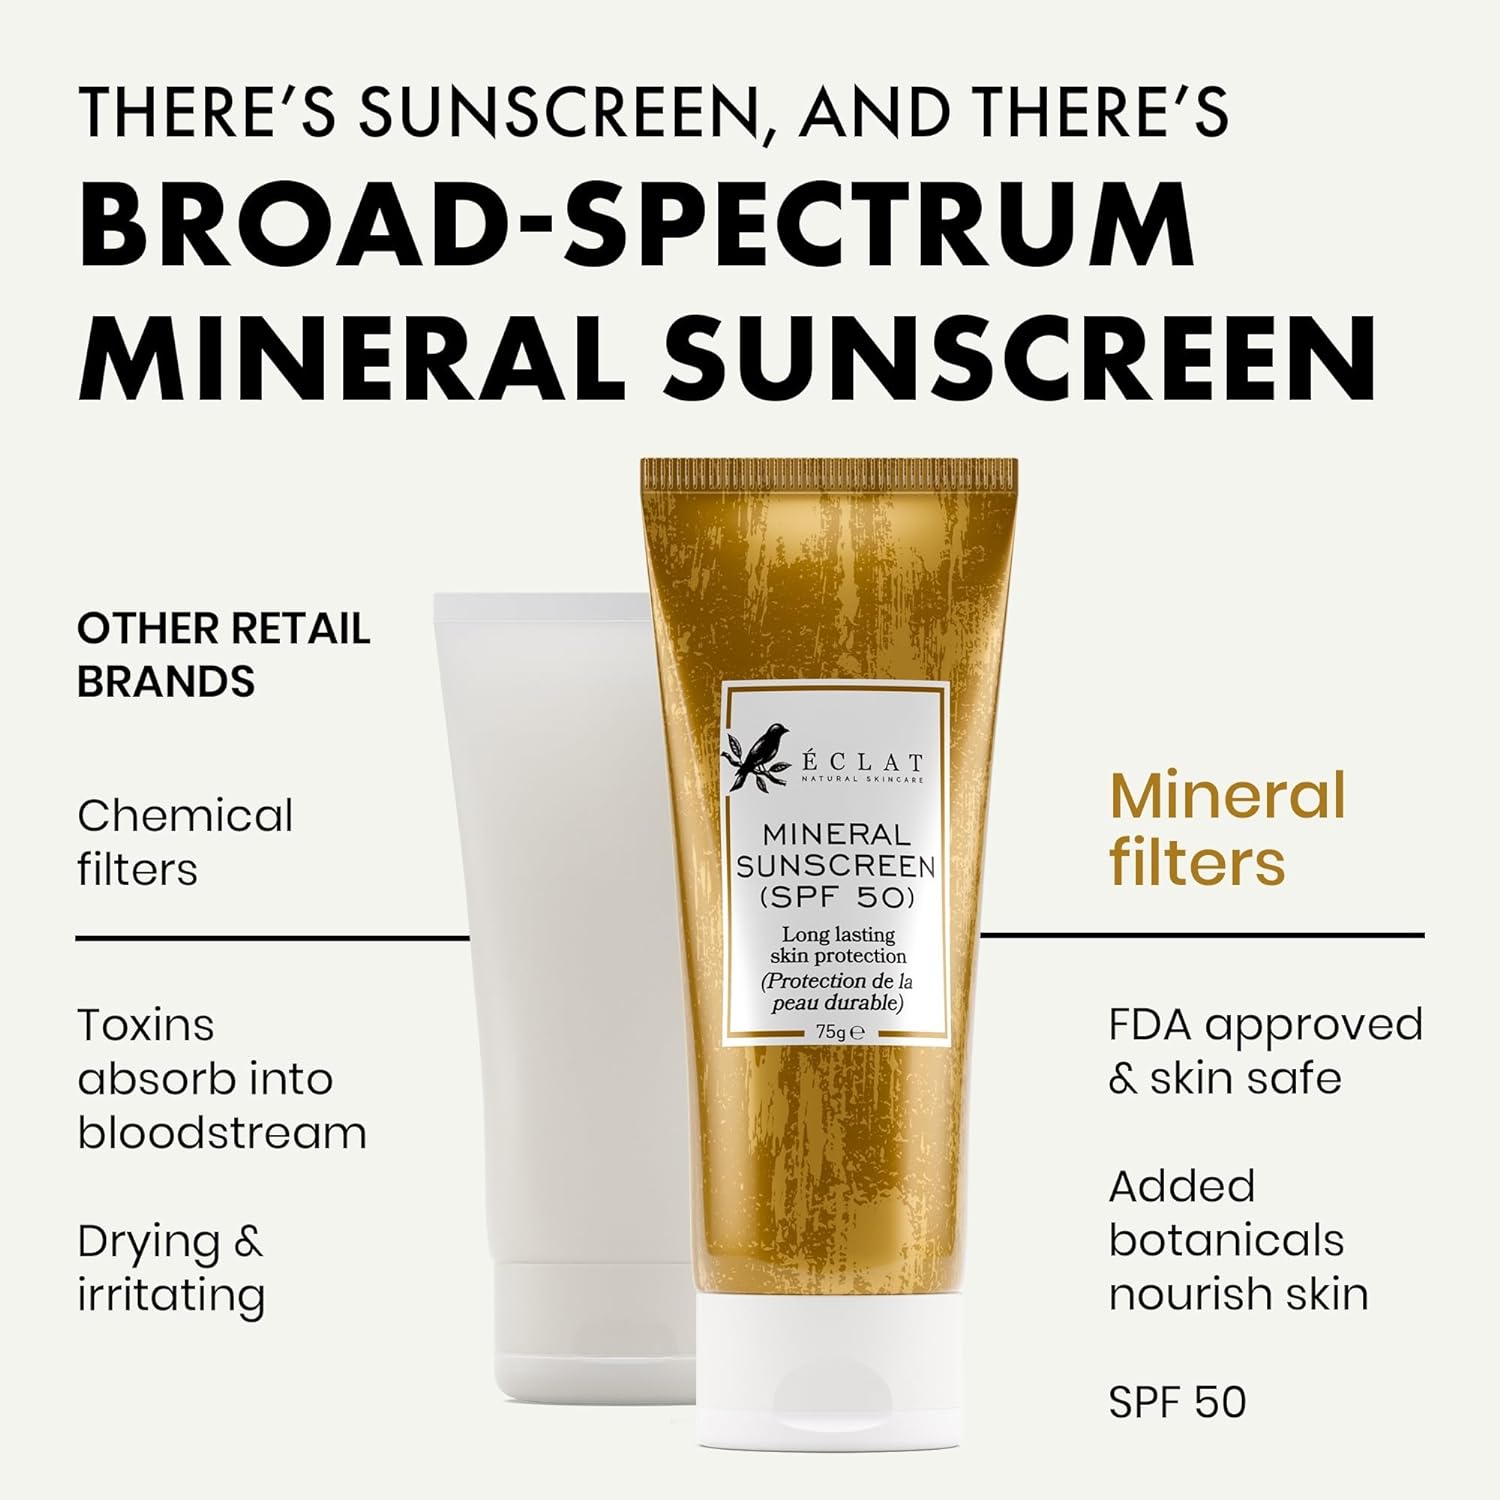 Mineral Sunscreen - Zinc Oxide Sunscreen - Clear Sun Block for Sensitive Skin, Blocks UVA + UVB Rays, Long Lasting Protection - Broad Spectrum Spf 50 Sunscreen, Safe for All Skin Types : Beauty & Personal Care